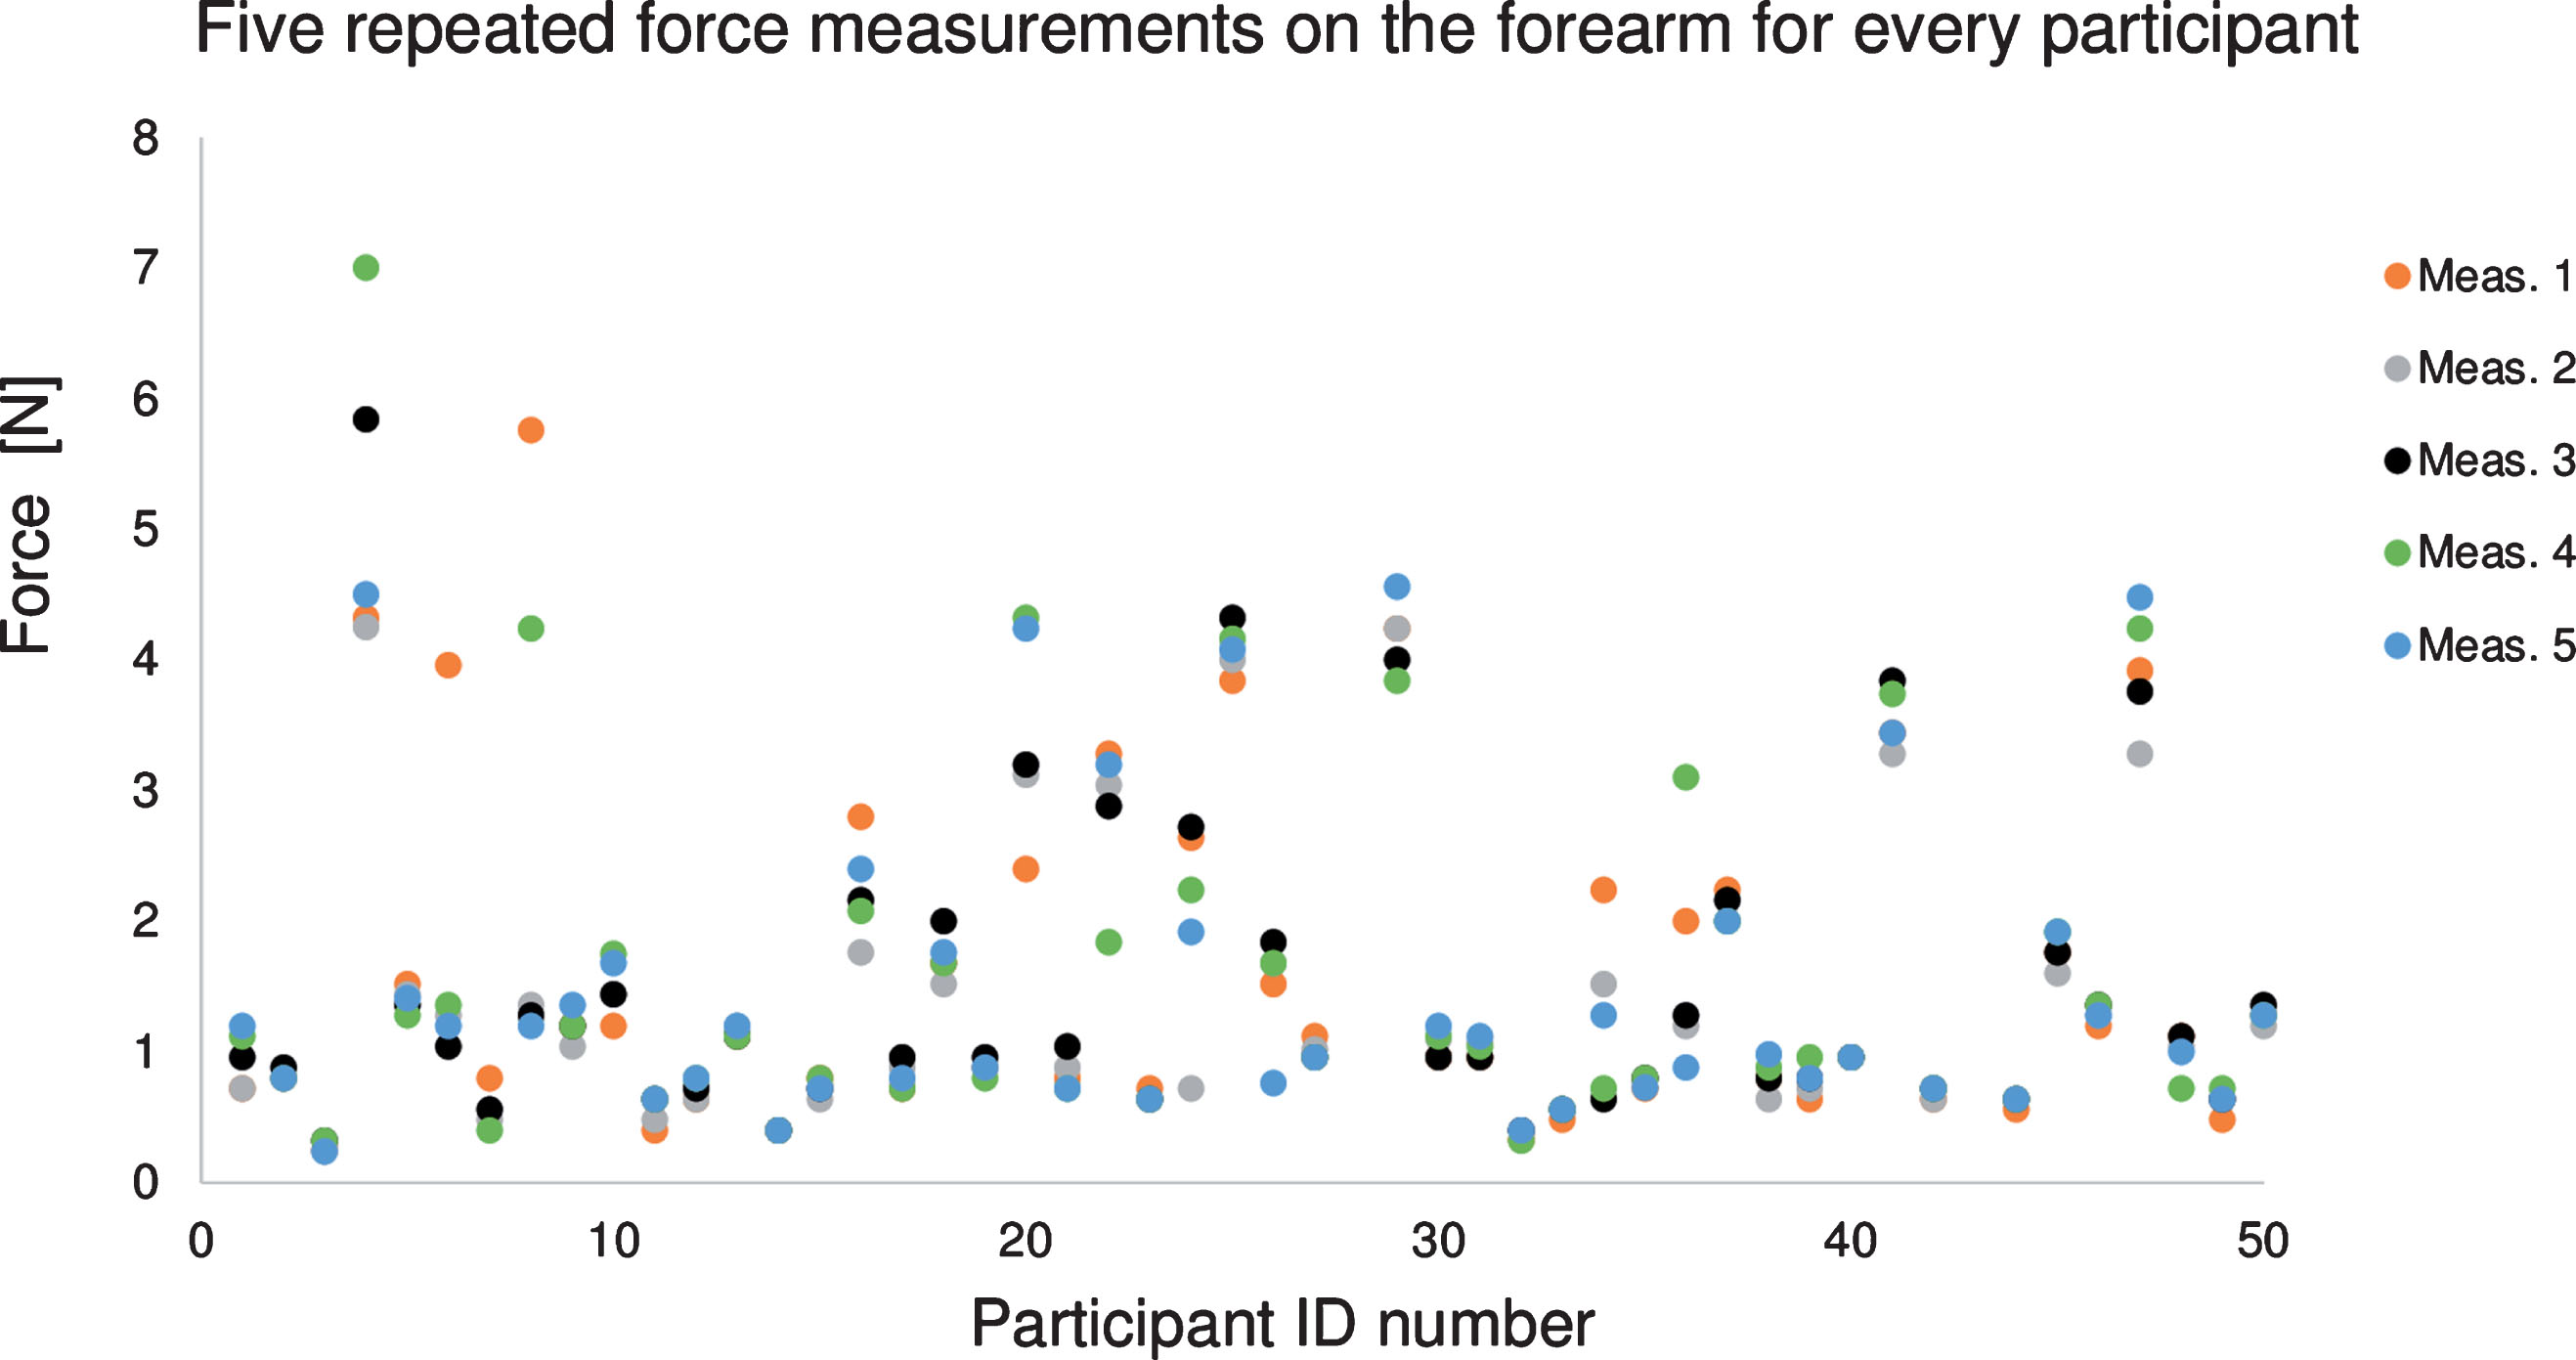 Applied force required to reduce the blood flow within the vein to the targeted maximal blood velocity of 1 mm/sec for 5 repeated ultrasound measurements on the forearm of every participant. Participants #28 and #43 had no data for this configuration. The color of data points corresponds to the order in which measurements were taken. There was no association between the calibrated force applied on the skin and the measurement order (p-value >0.05 among 5 measurements).